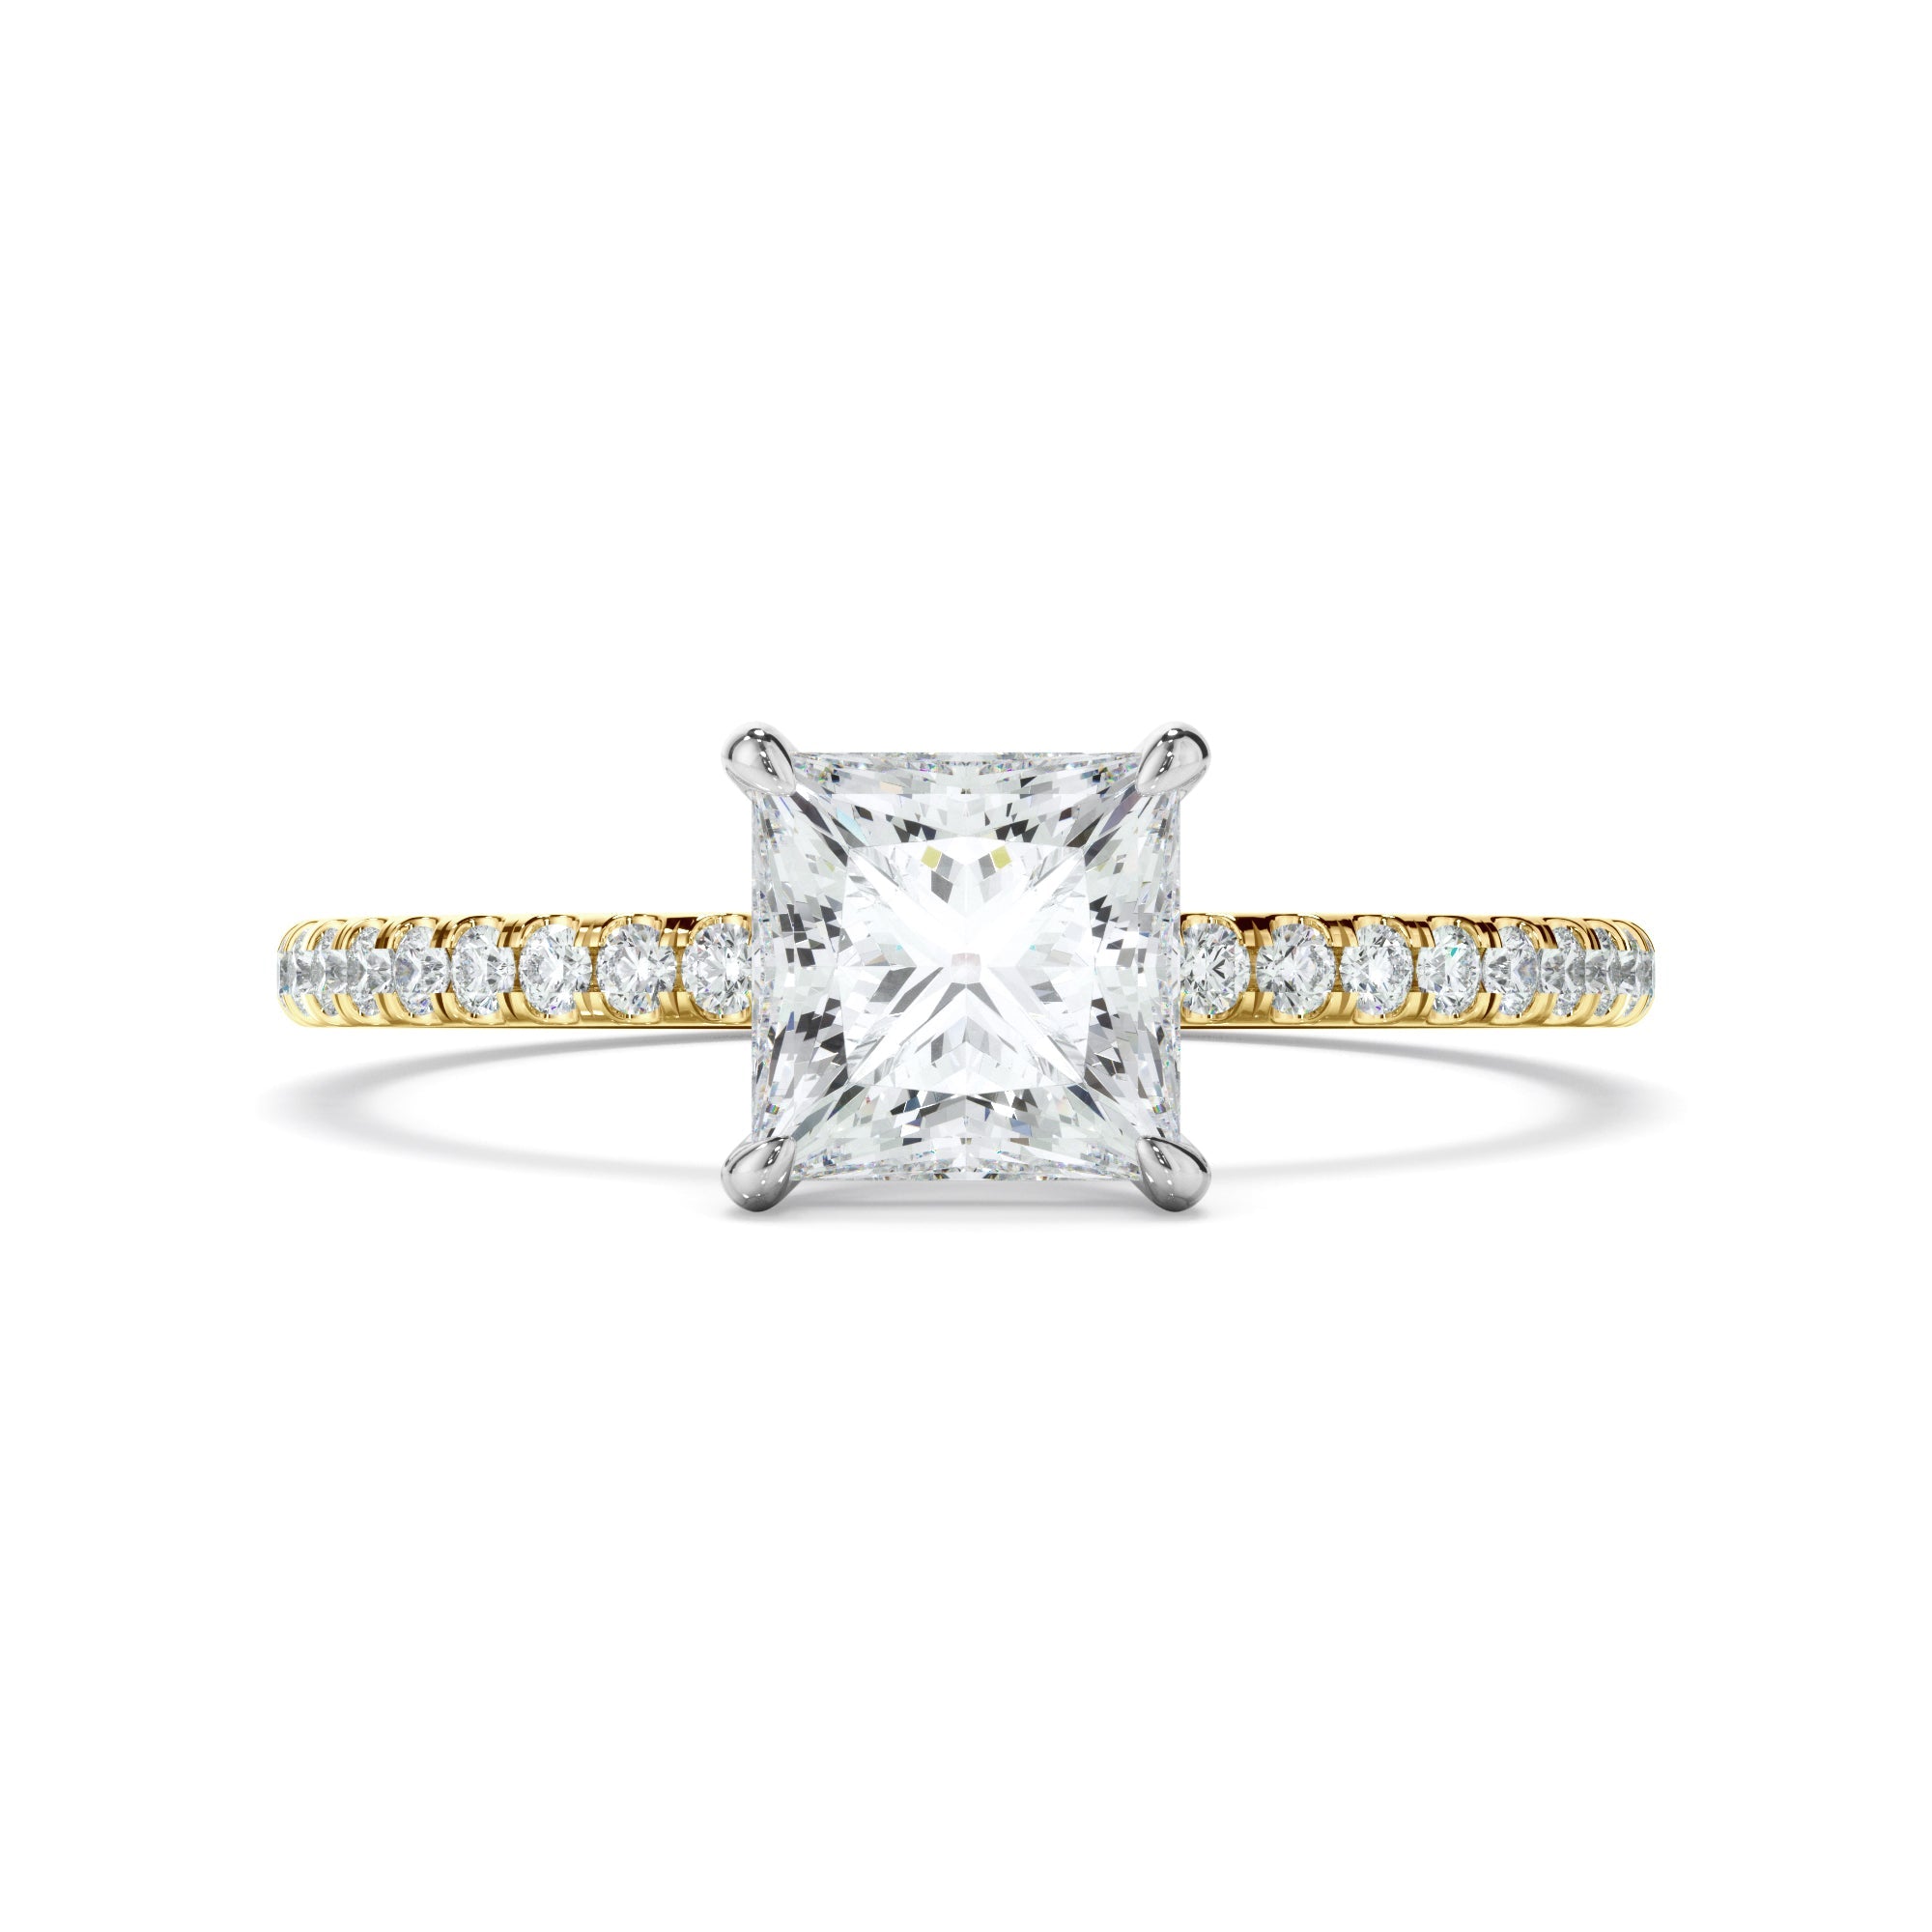 Princess Cut Diamond Solitaire Engagement Ring With Pave Band